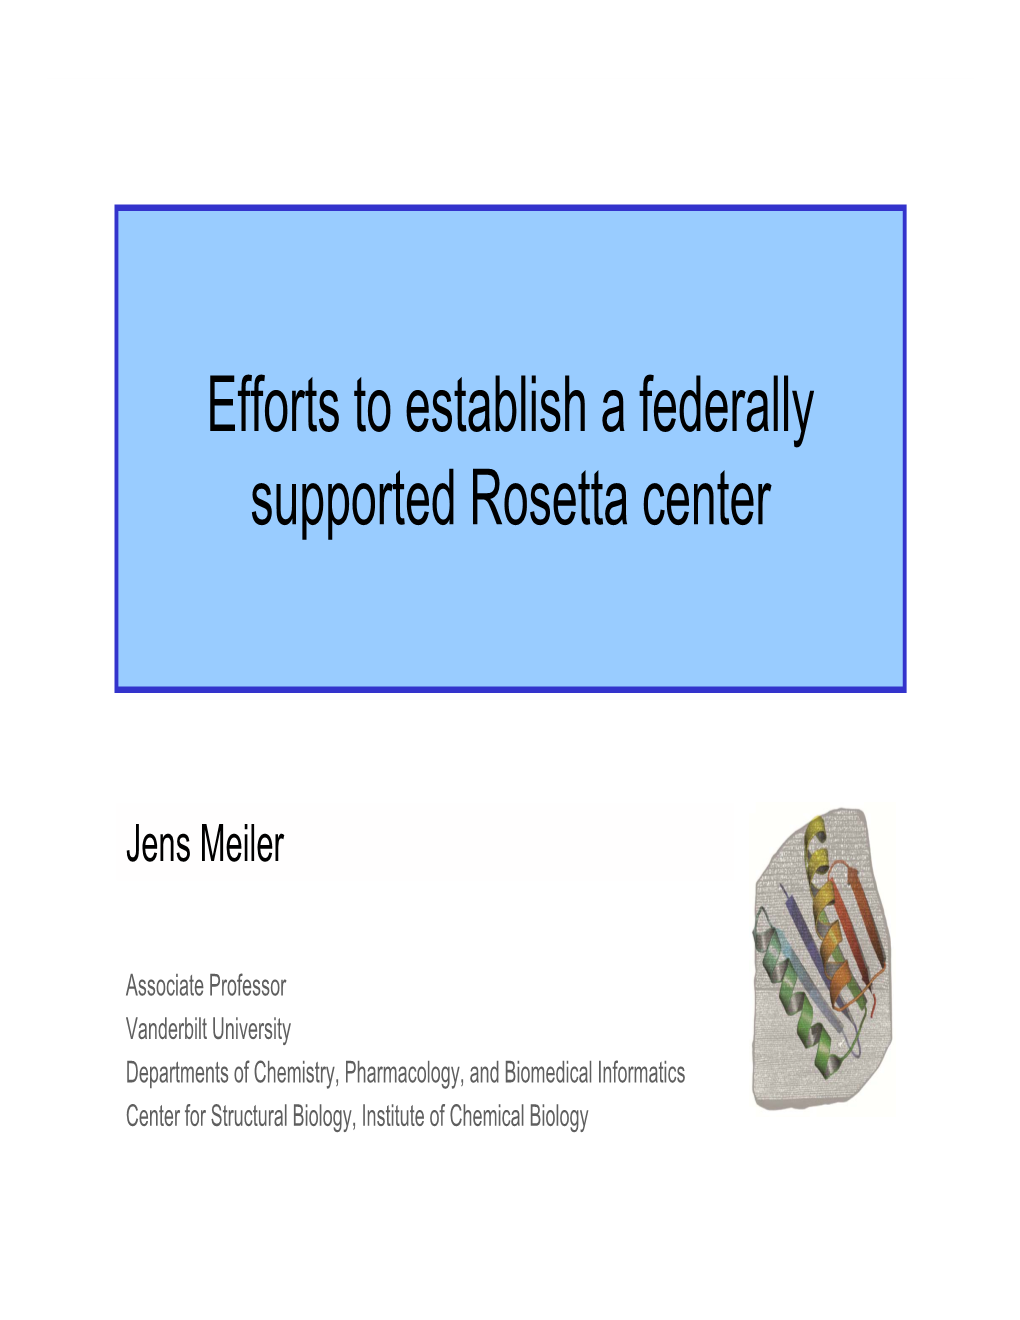 Efforts to Establish a Federally Supported Rosetta Center